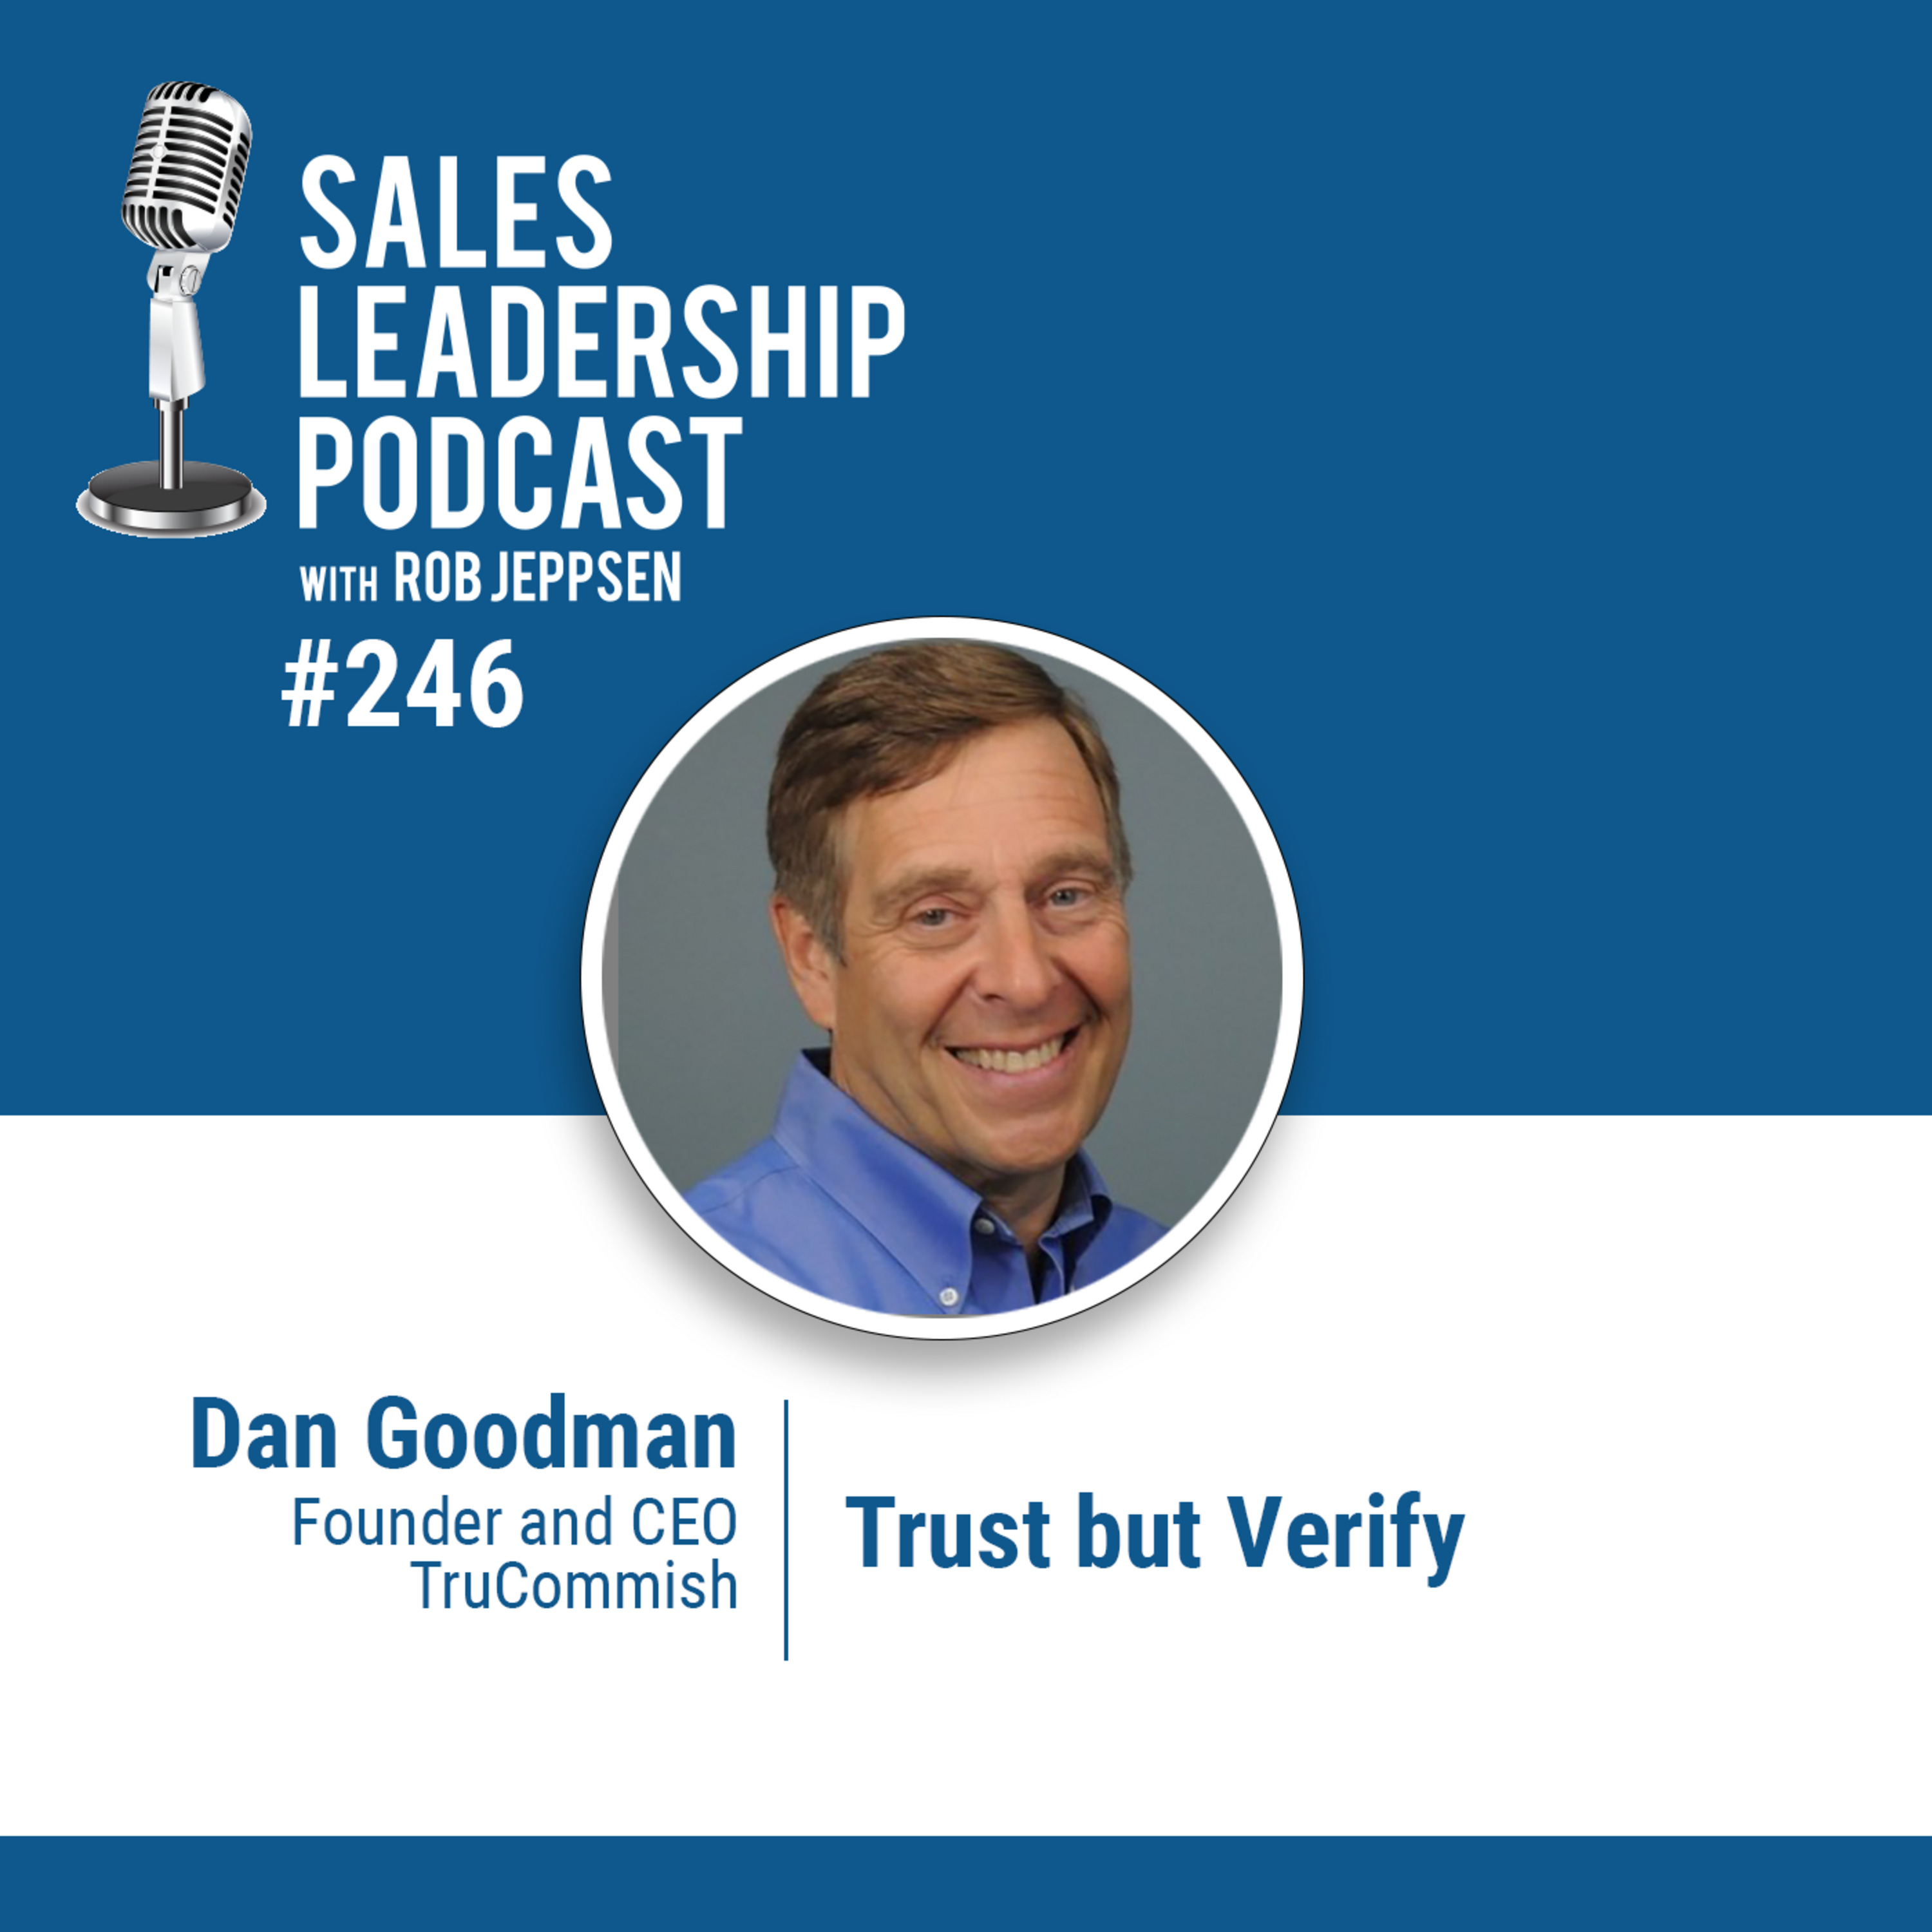 Episode 246: Dan Goodman, Founder and CEO of TruCommish: Trust but Verify